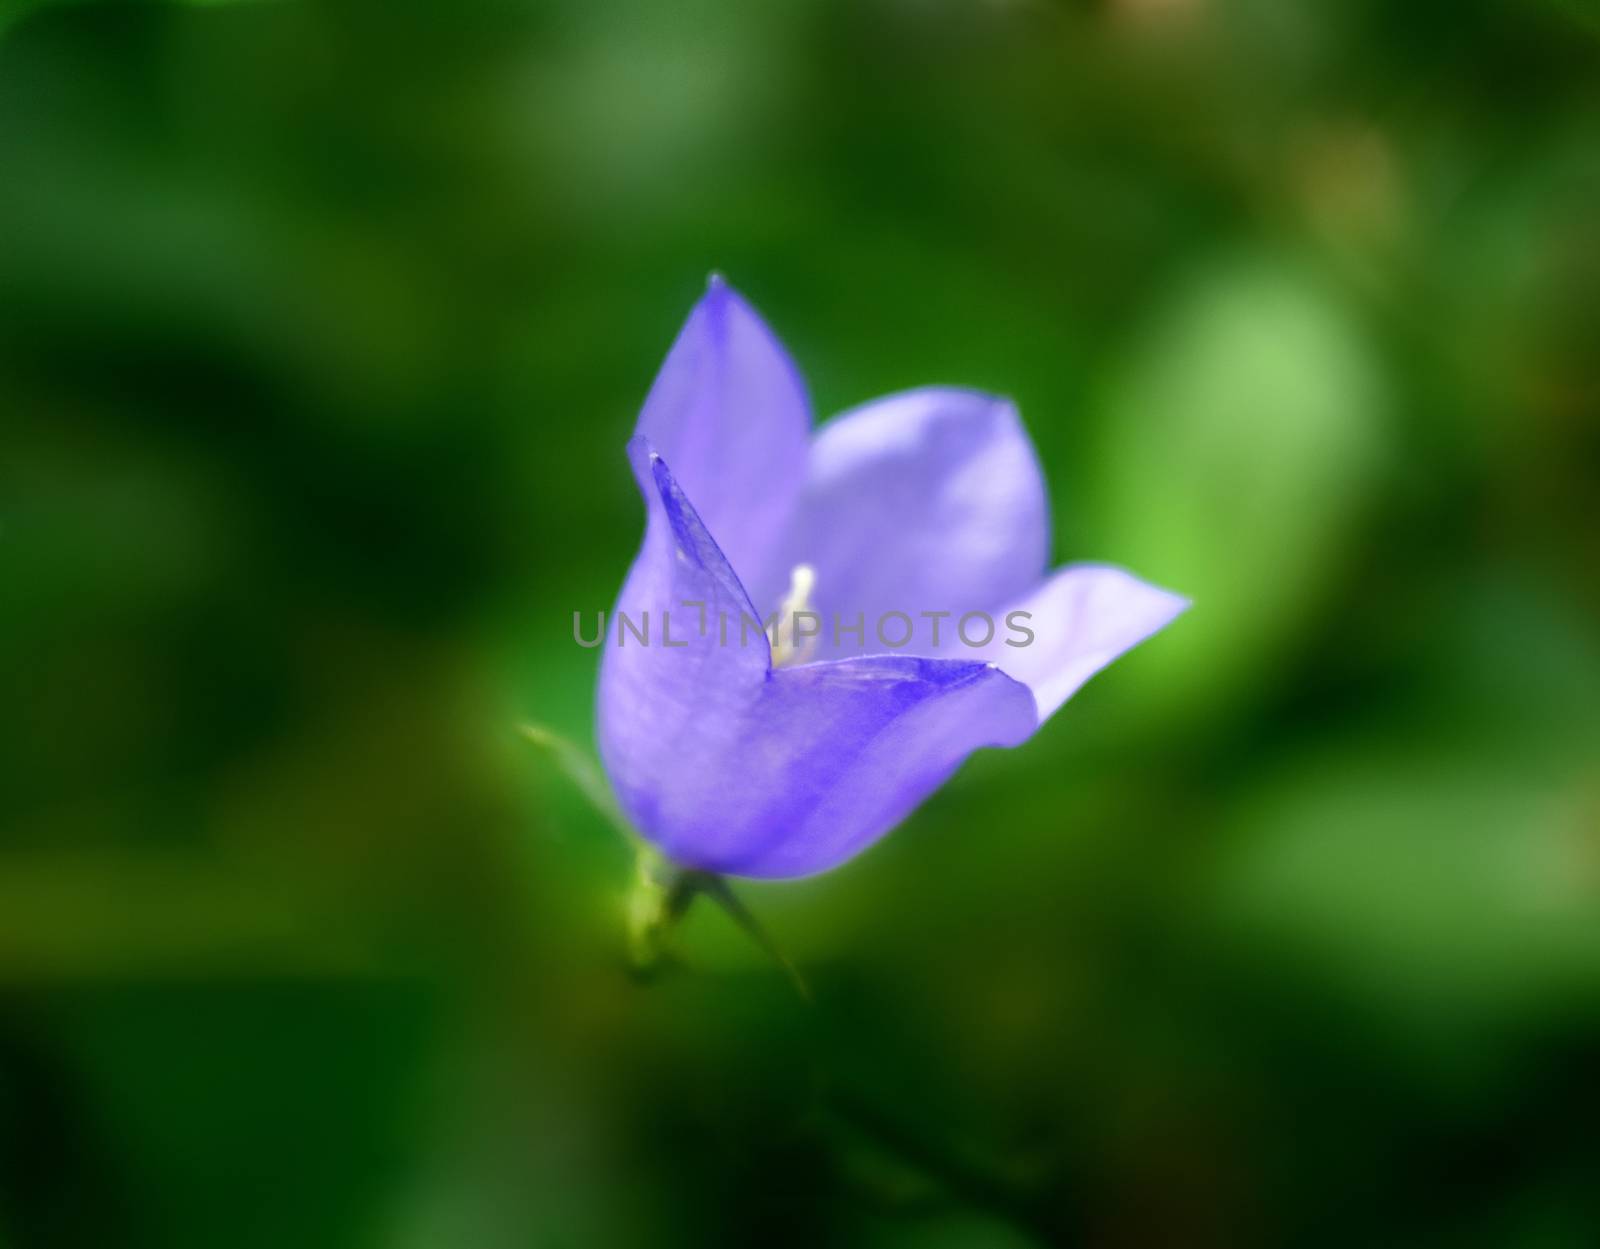 Beautiful Purple Bell Flower closeup on Natural Green Blurred background Outdoors. Focus on Edge of Petals